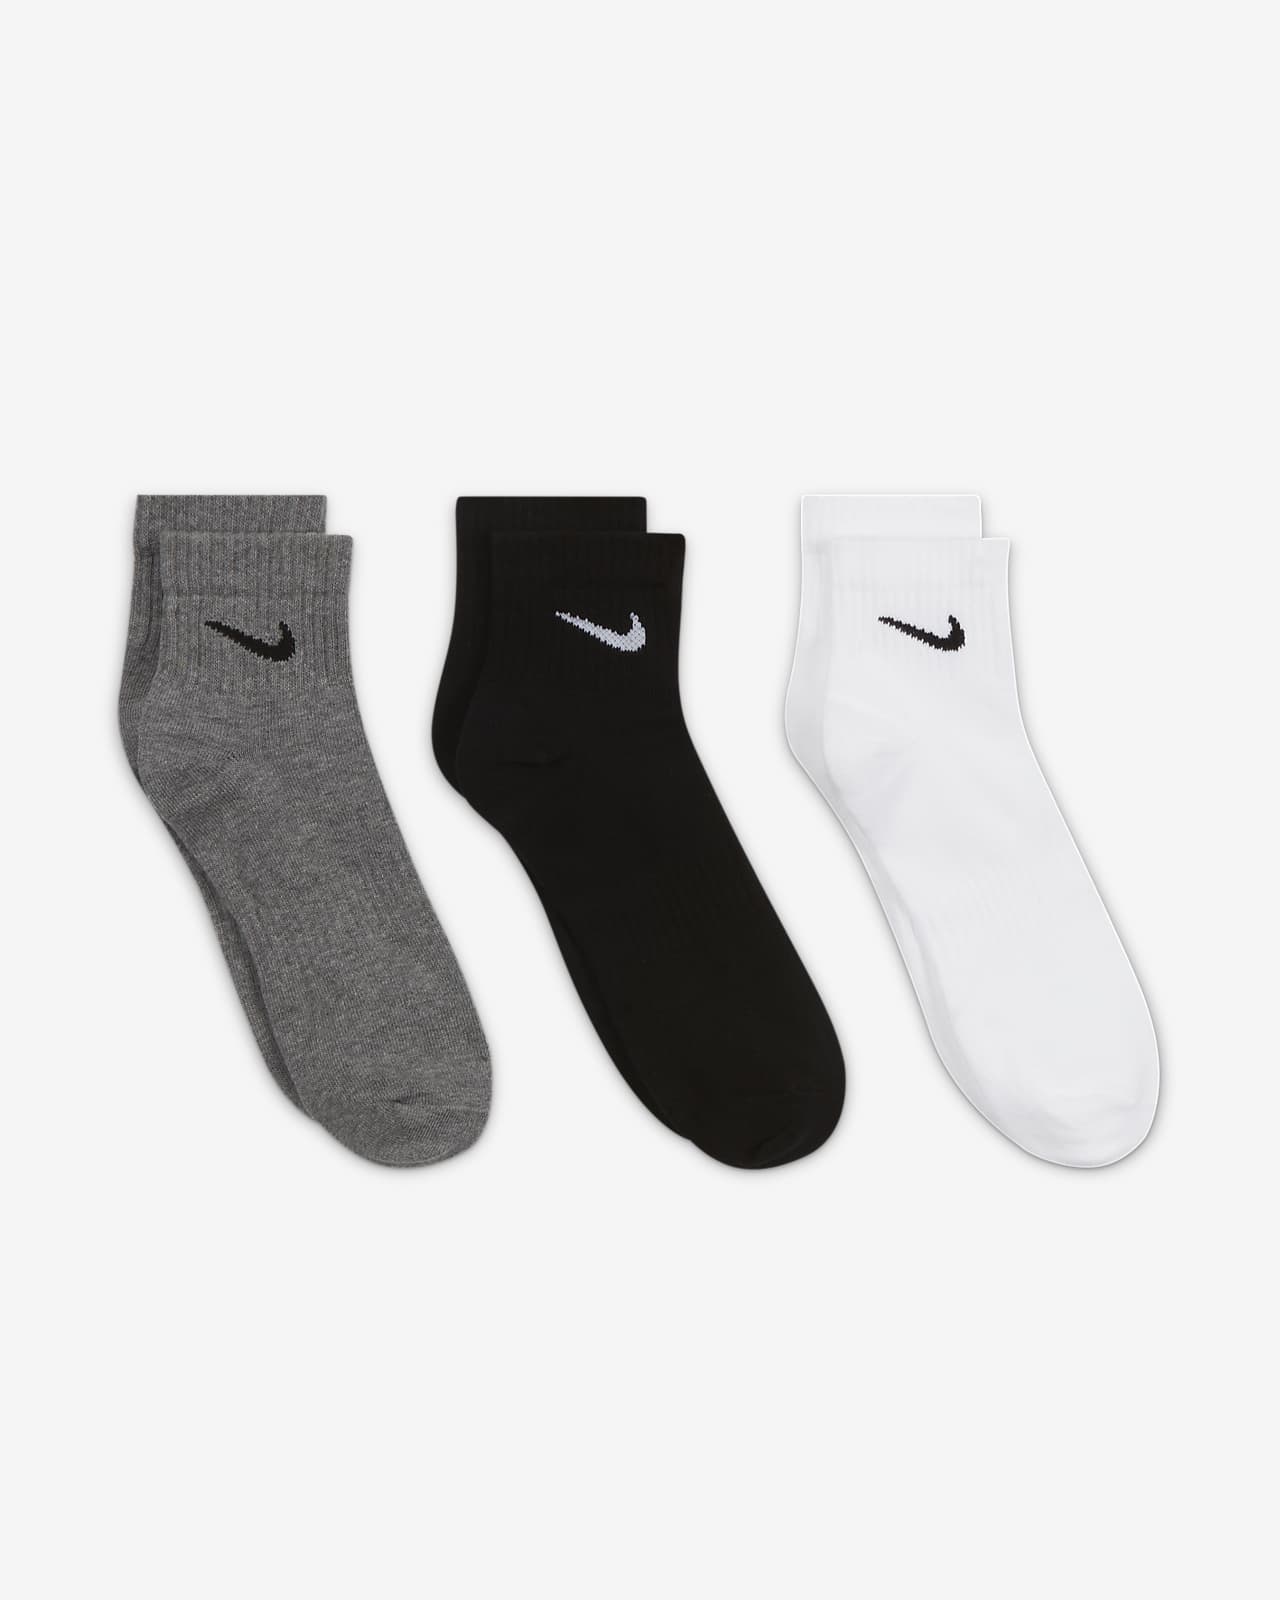 Chaussettes Nike everyday lightweight - Nike - Homme - Entretien physique